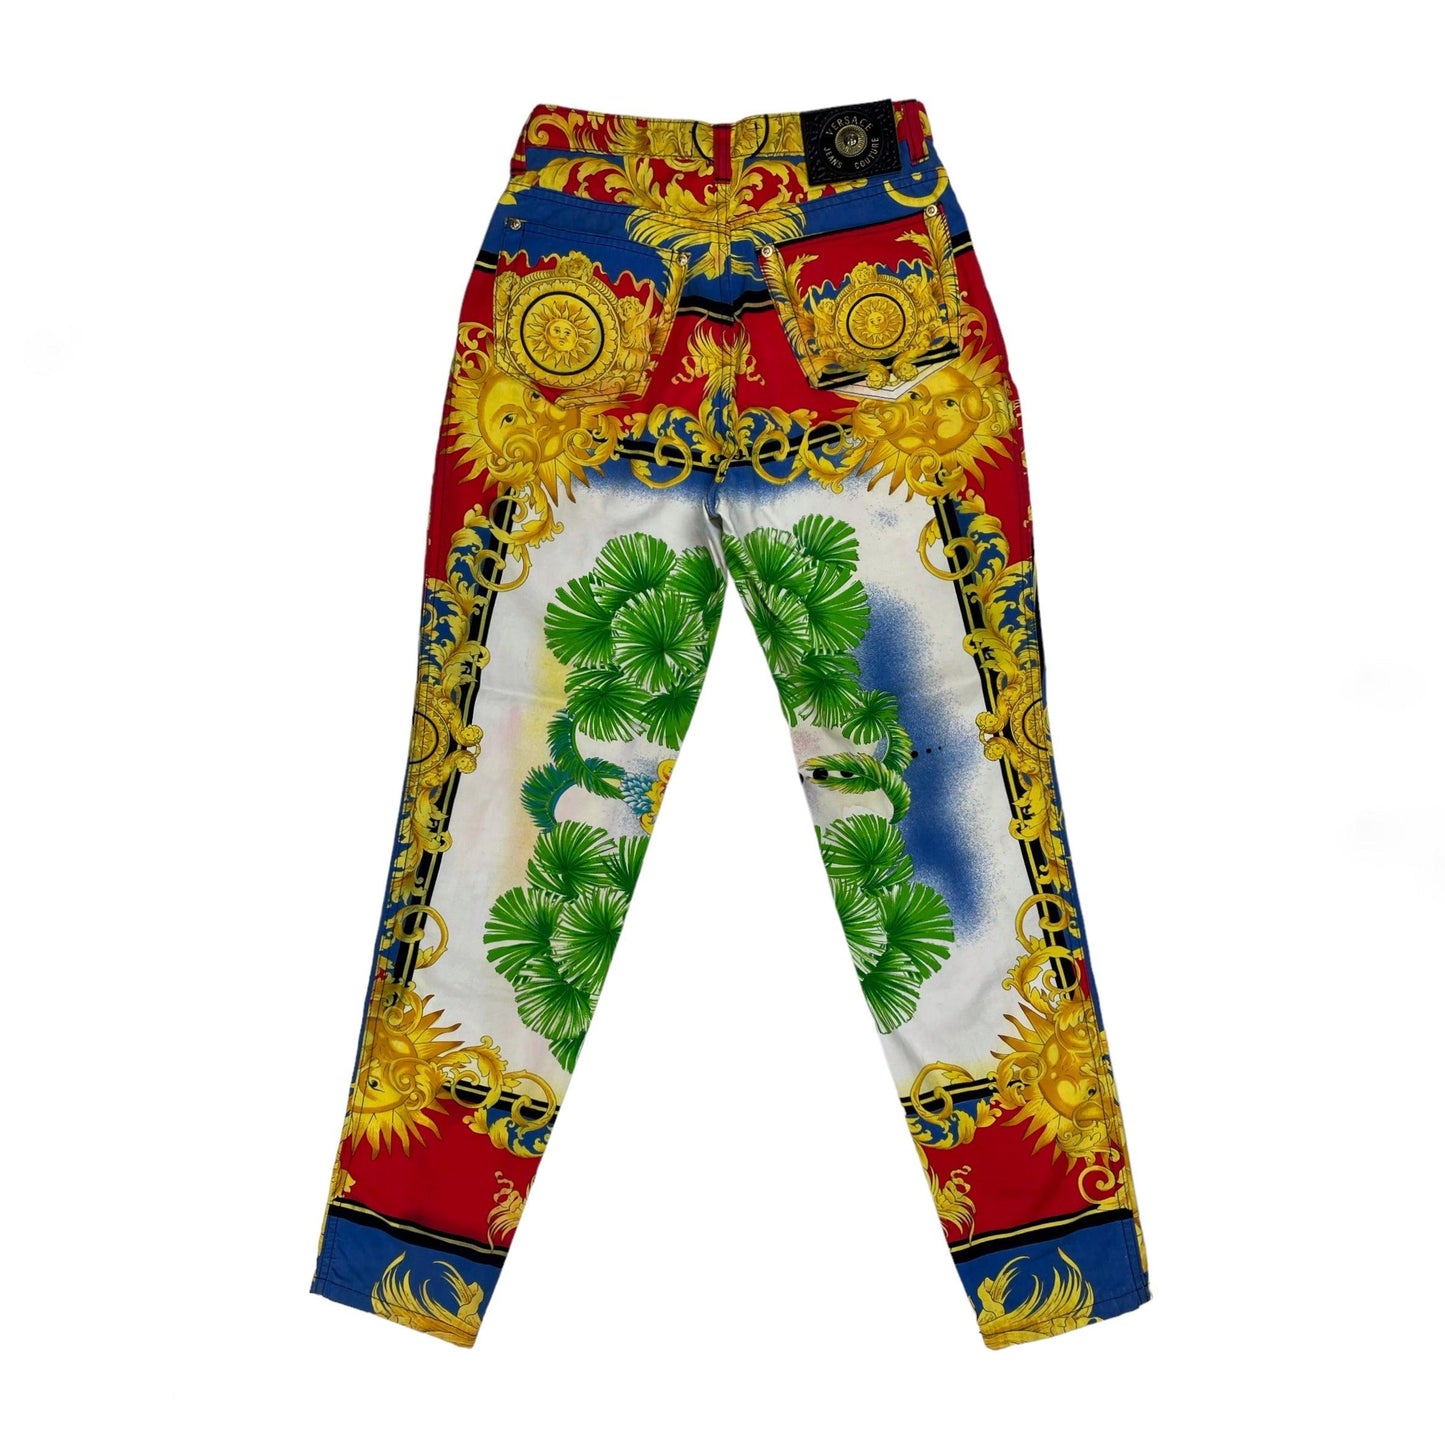 S/S 1993 Versace Sun Jeans - Known Source